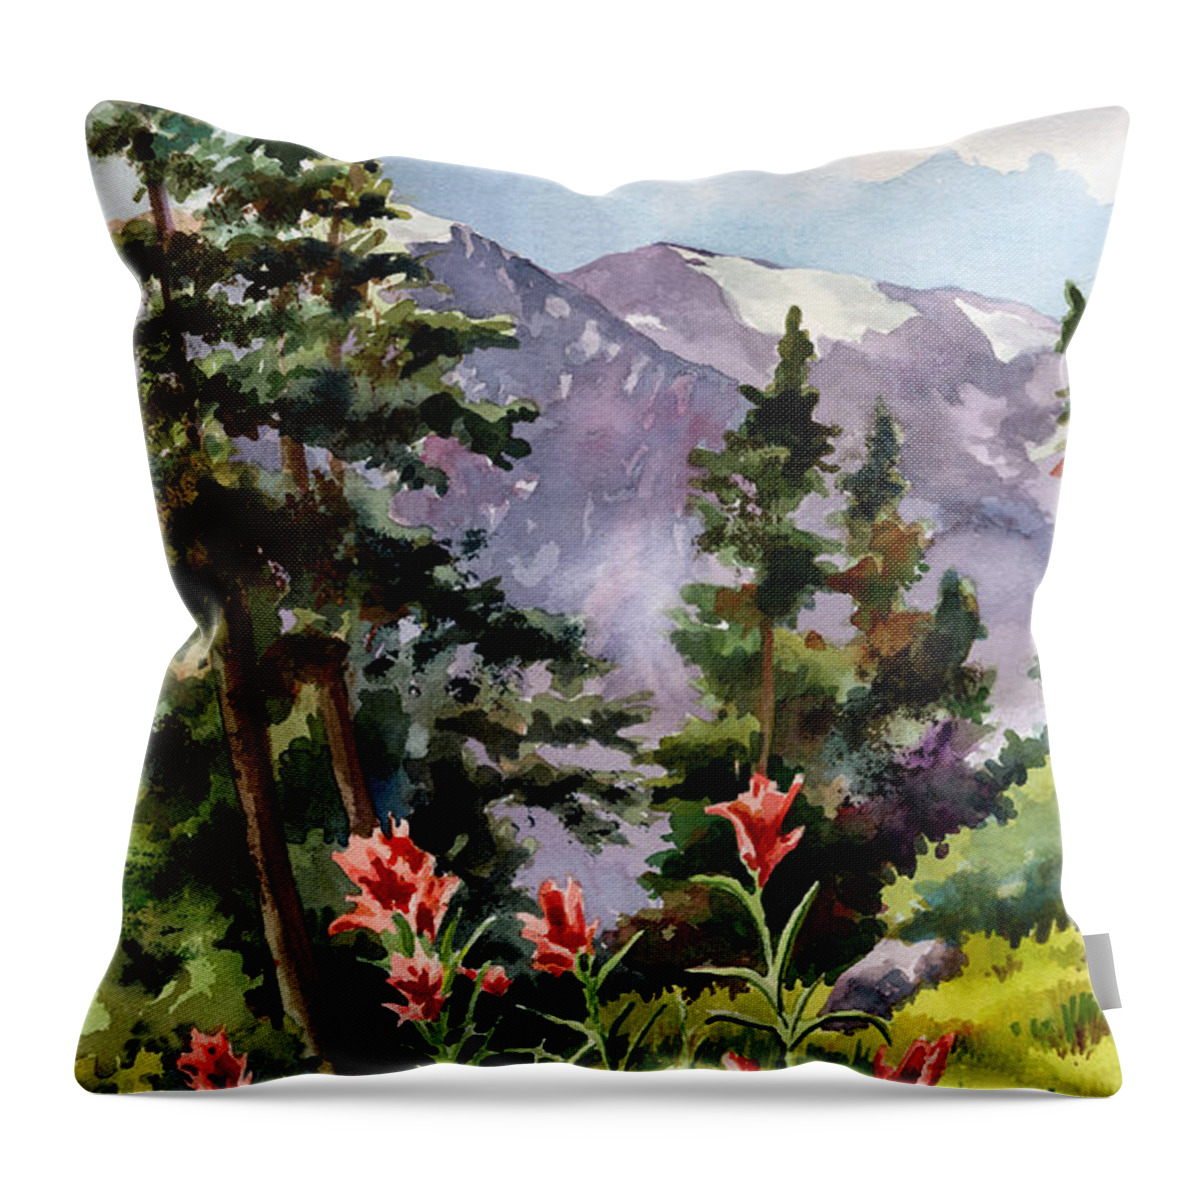 Colorado Art Throw Pillow featuring the painting Indian Paintbrush by Anne Gifford